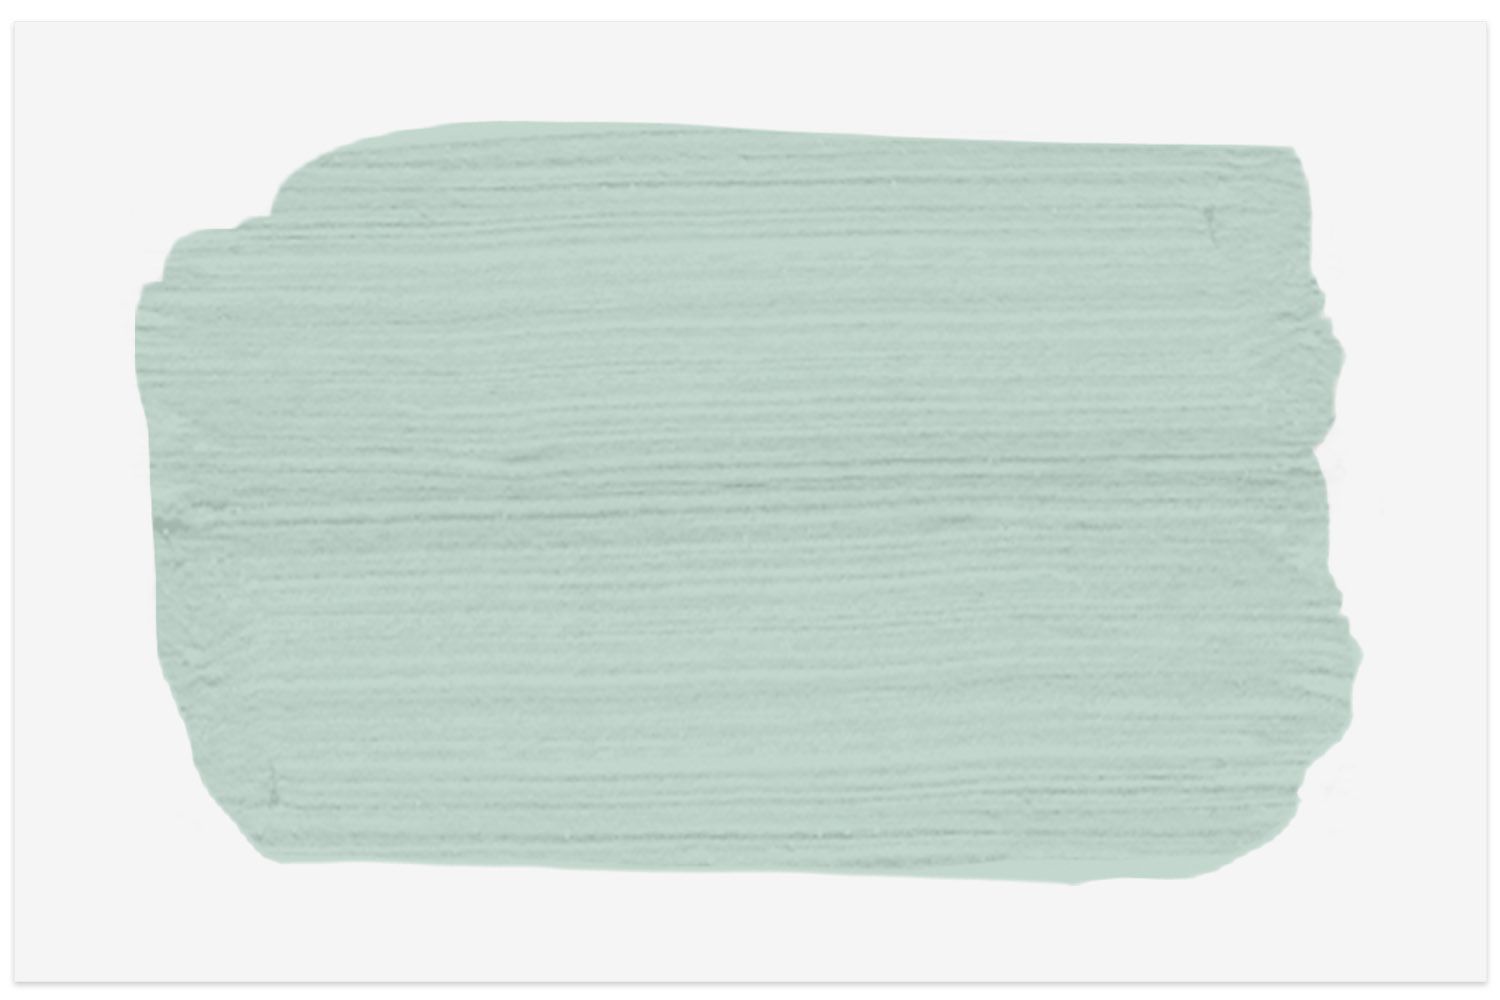 Geyser paint swatch from PPG Paints